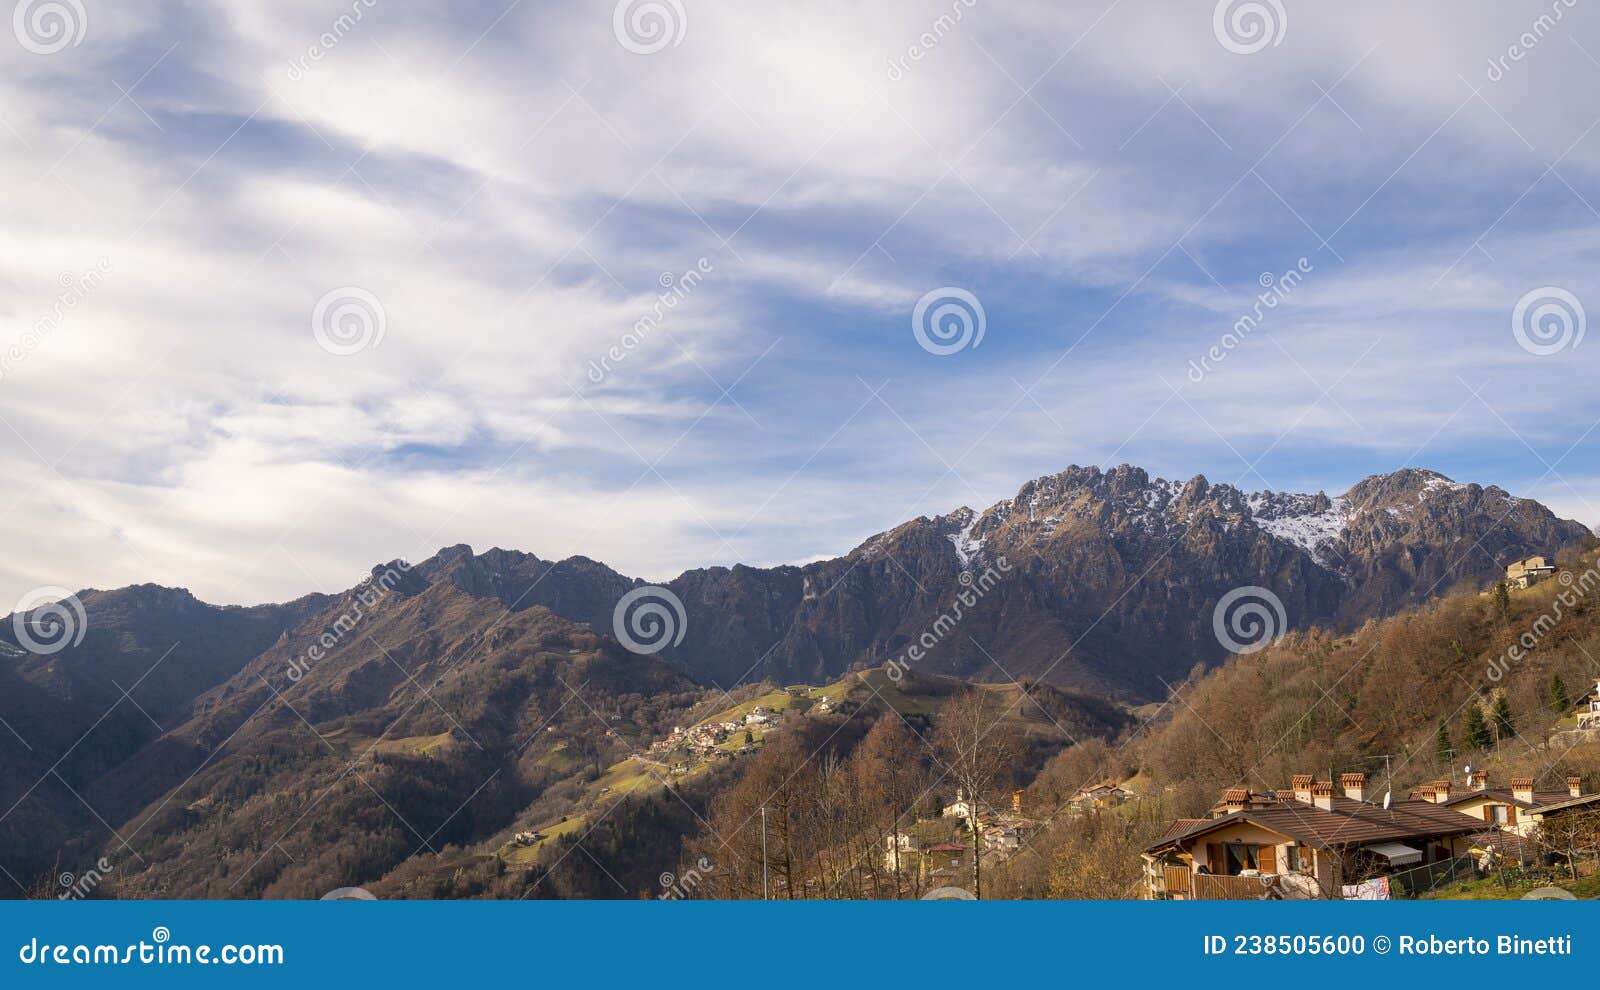 amazing view of the seriana valley and its mountains